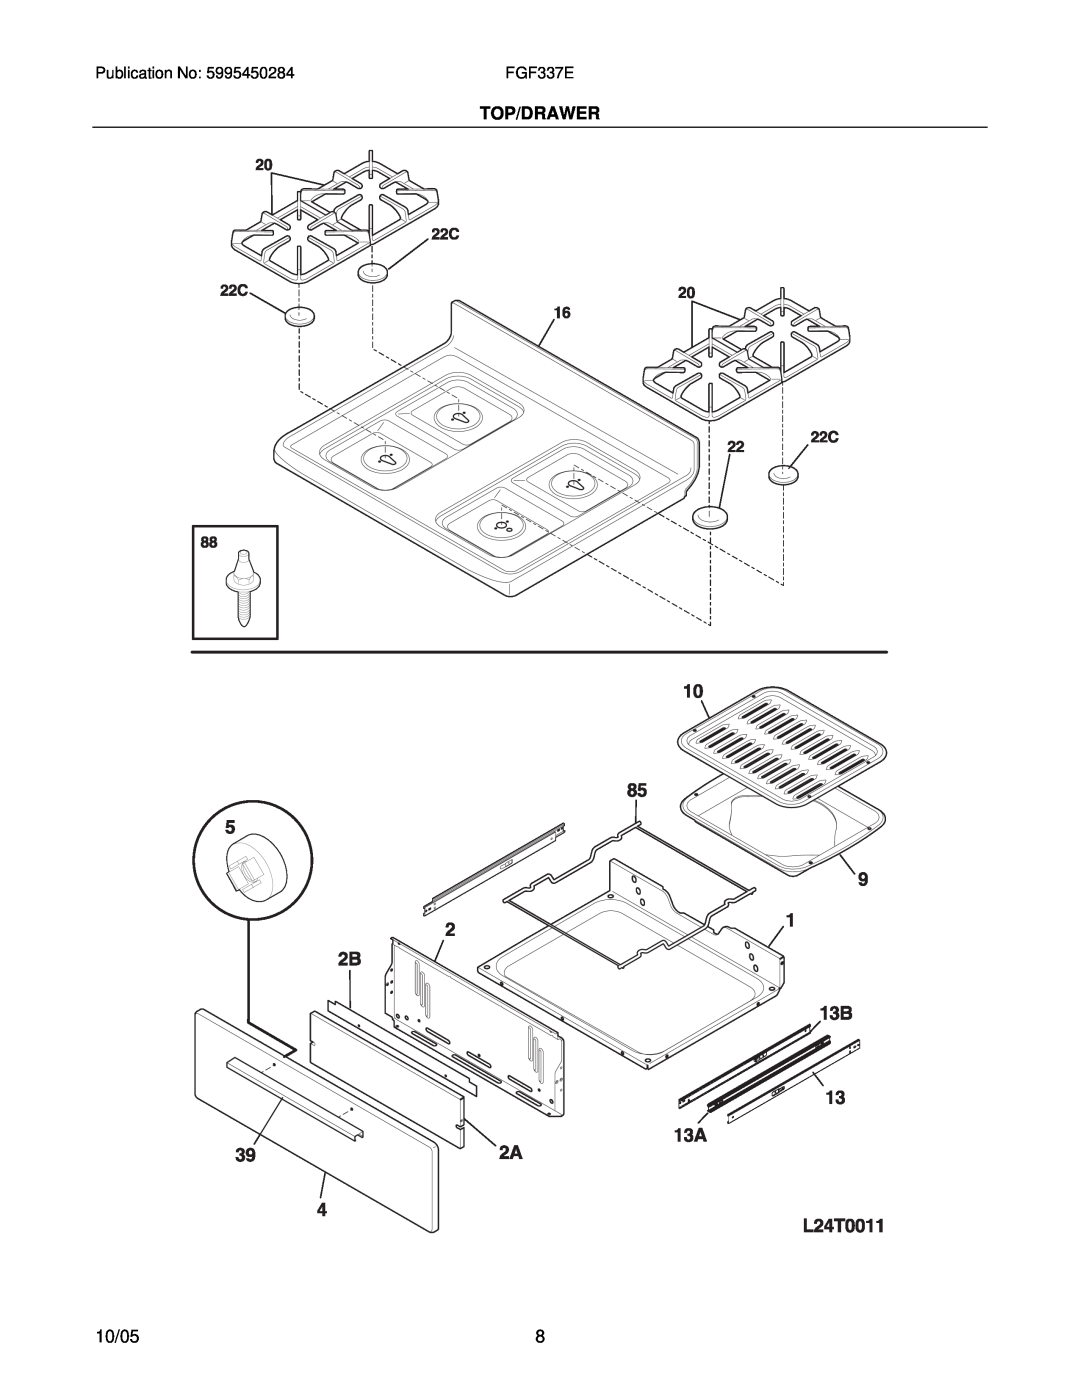 Frigidaire FGF337E installation instructions Top/Drawer, 10/05 